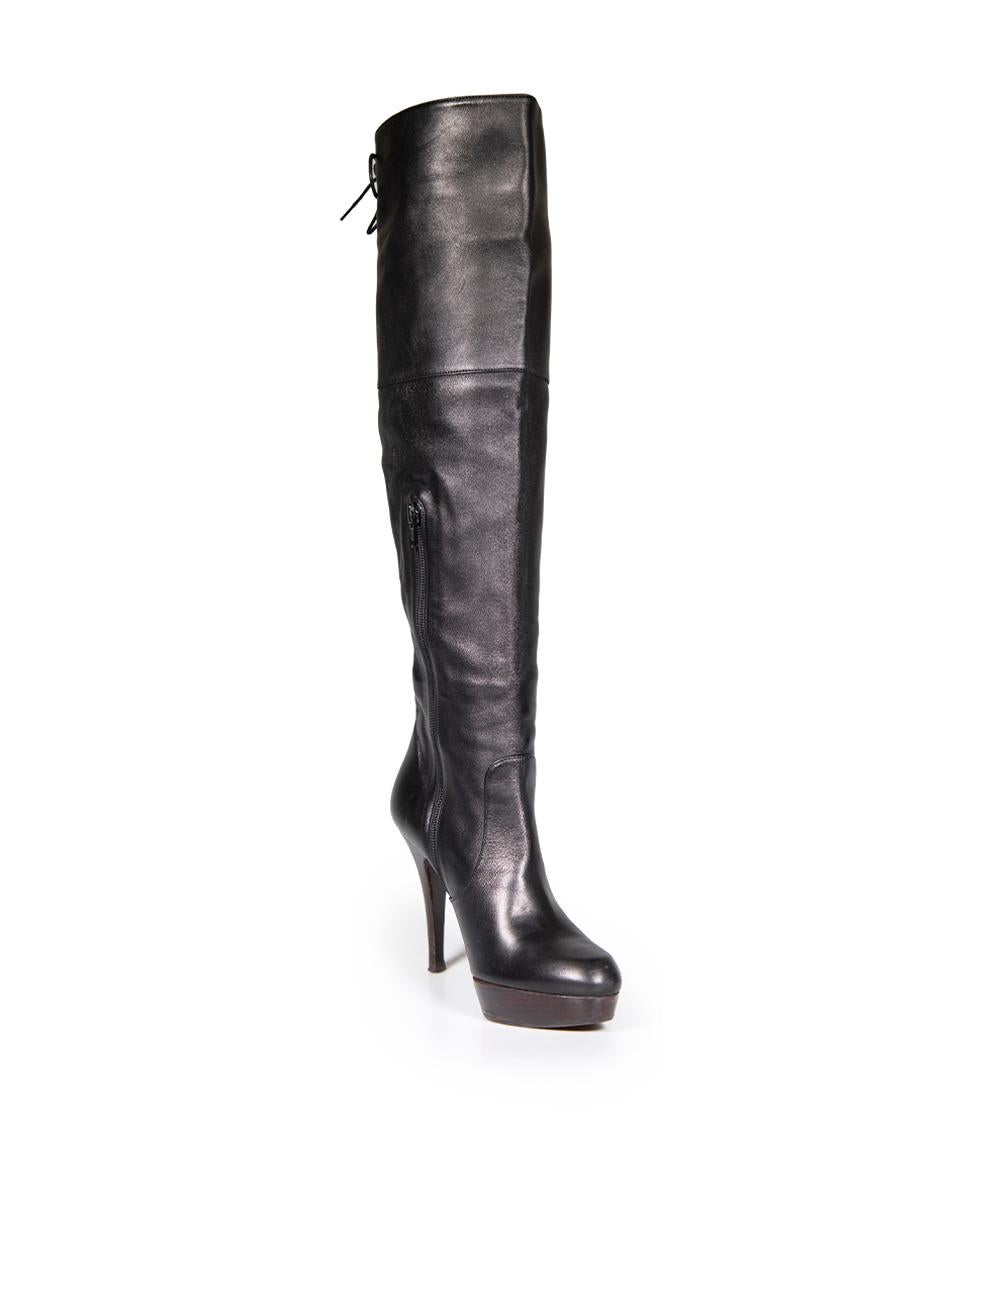 CONDITION is Very good. Minimal wear to boots is evident. Minimal wear to both boot heels and toes, as well as the right-side of the right boot with scratches and abrasions on this used Stuart Weitzman designer resale item. These boots come with